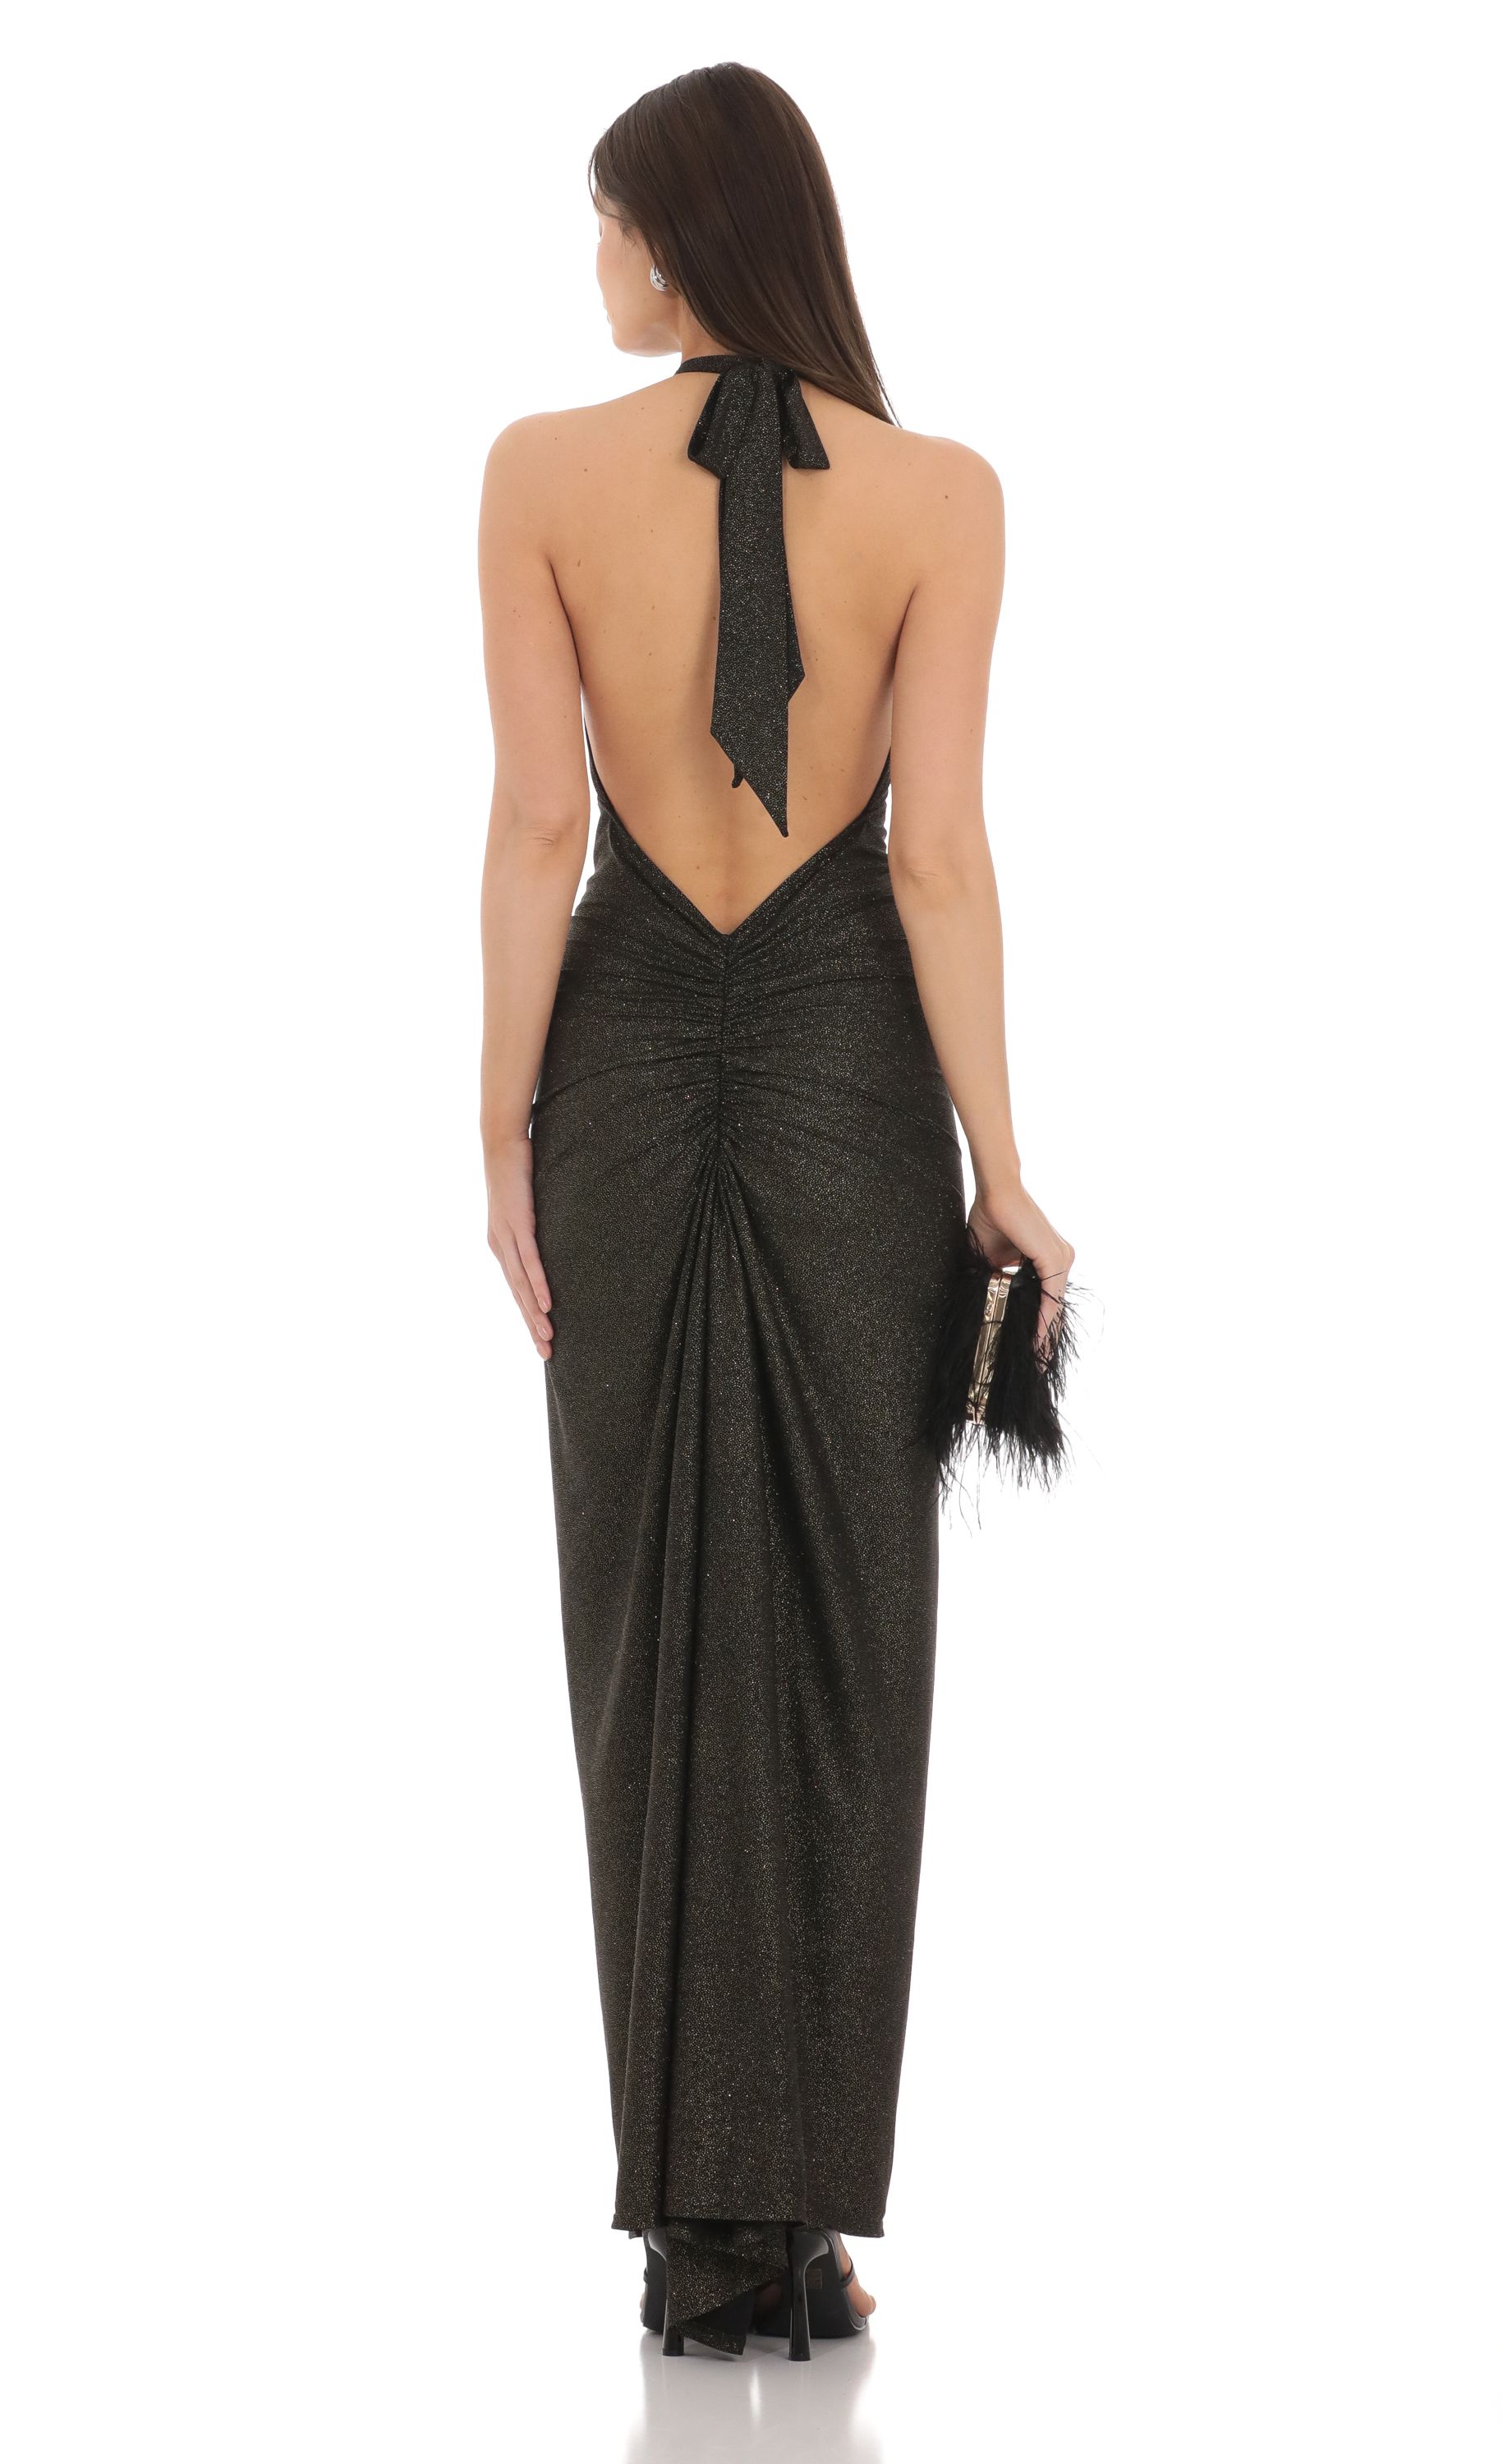 Whitney Sequin Maxi Dress in Black